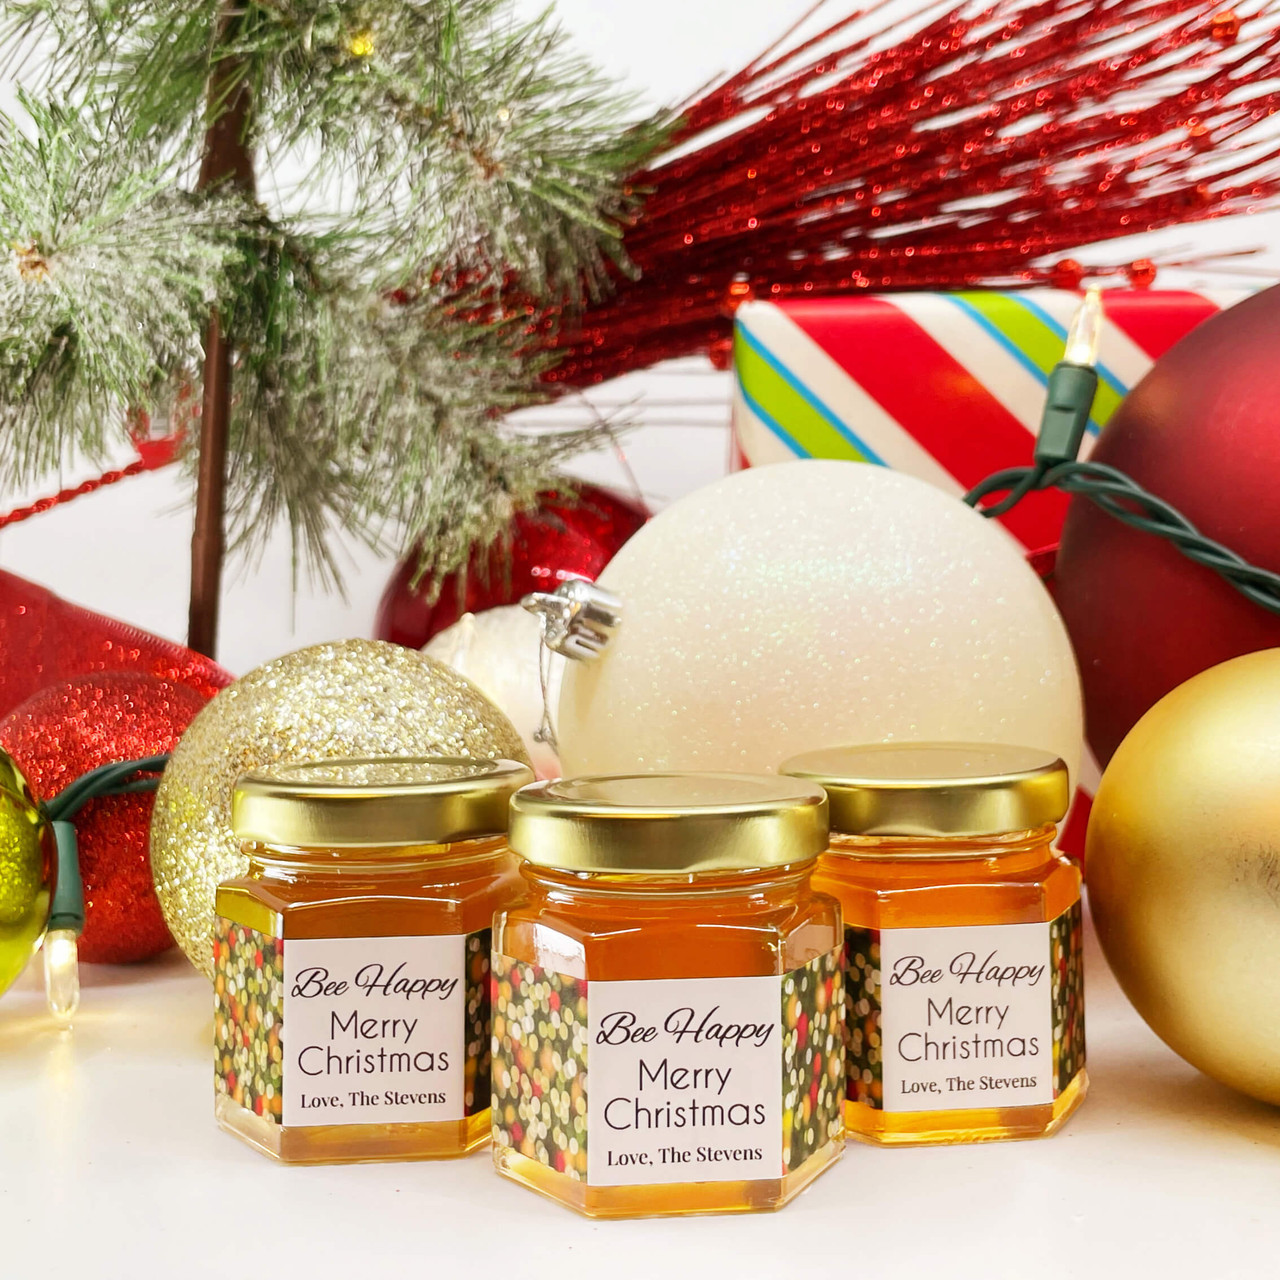 Bee Happy - Holiday Party Favor Honey Christmas Gifts - 2oz Gold Lid